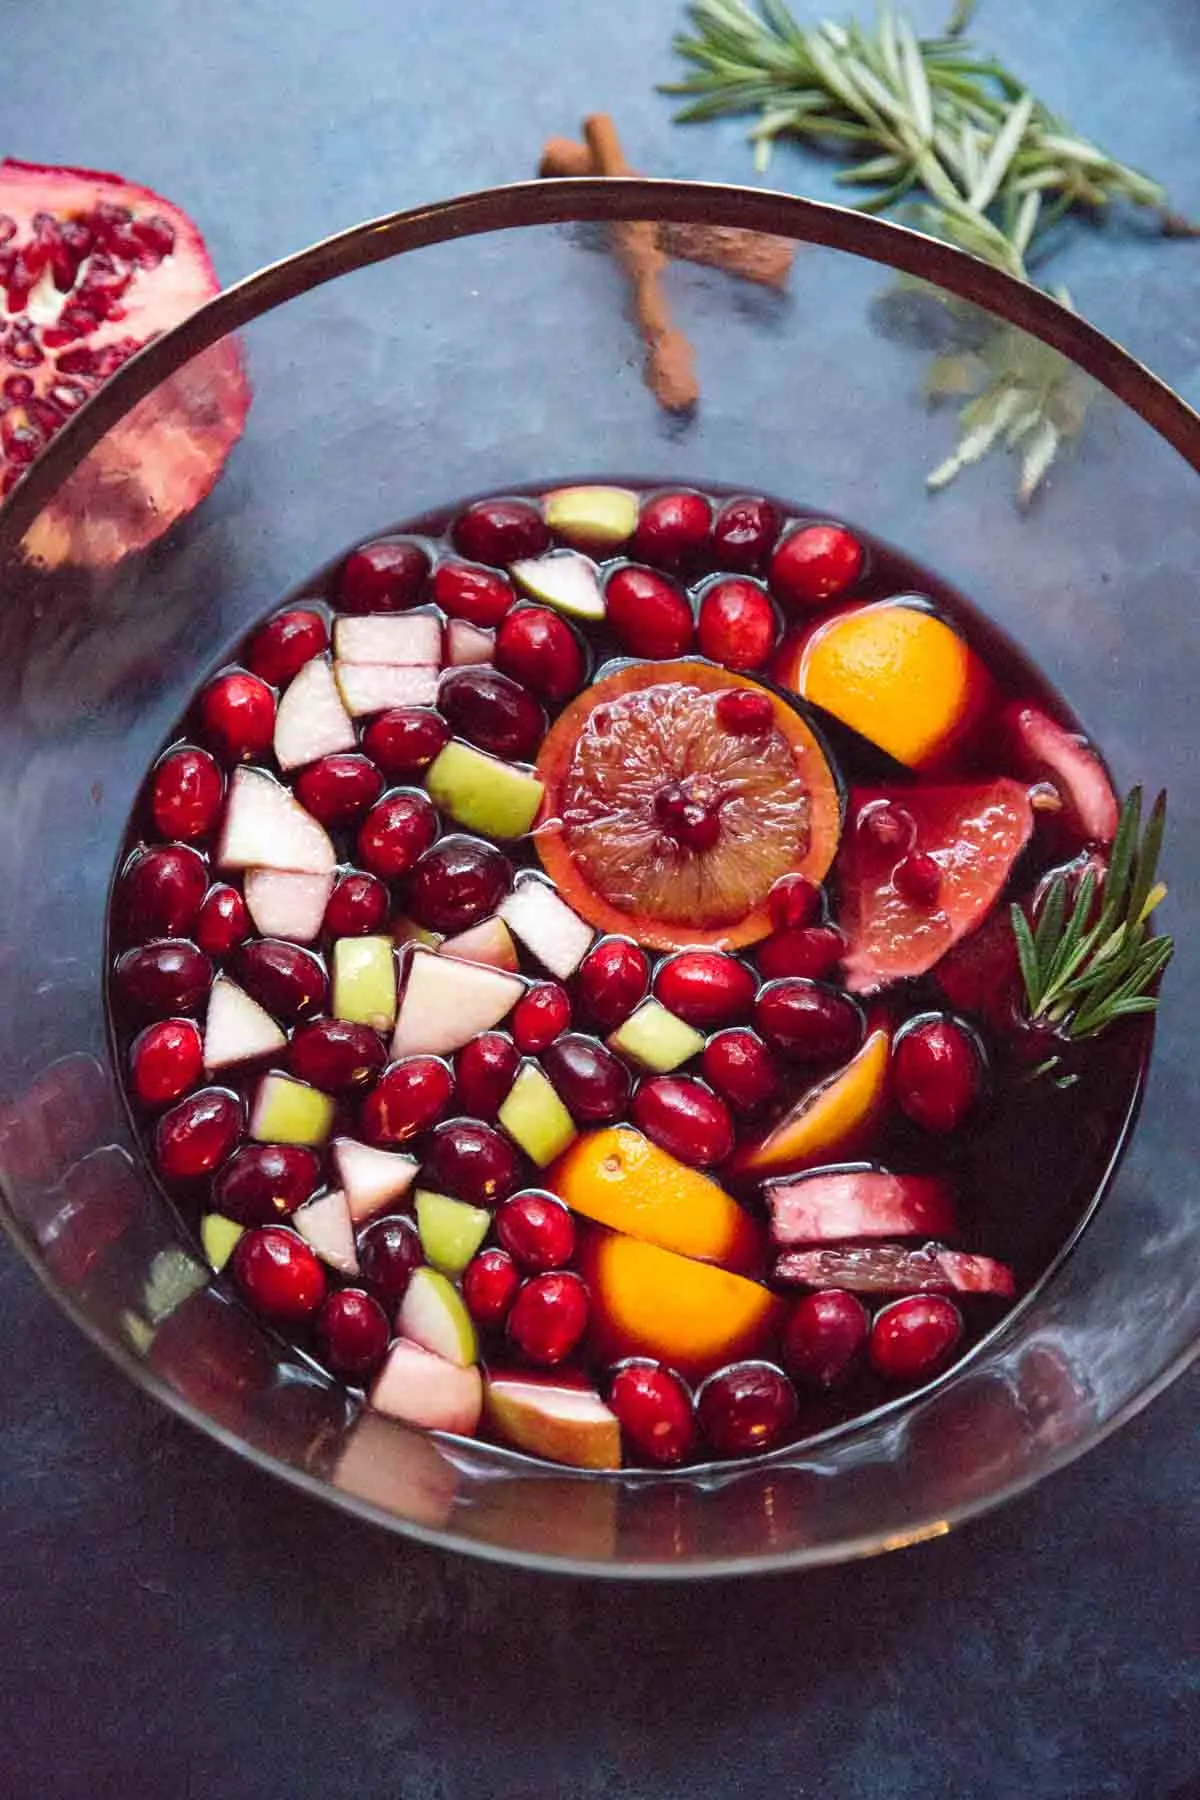 https://www.trialandeater.com/wp-content/uploads/2018/12/Holiday-Sangria-Recipe-Trial-and-Eater-23.jpg.webp